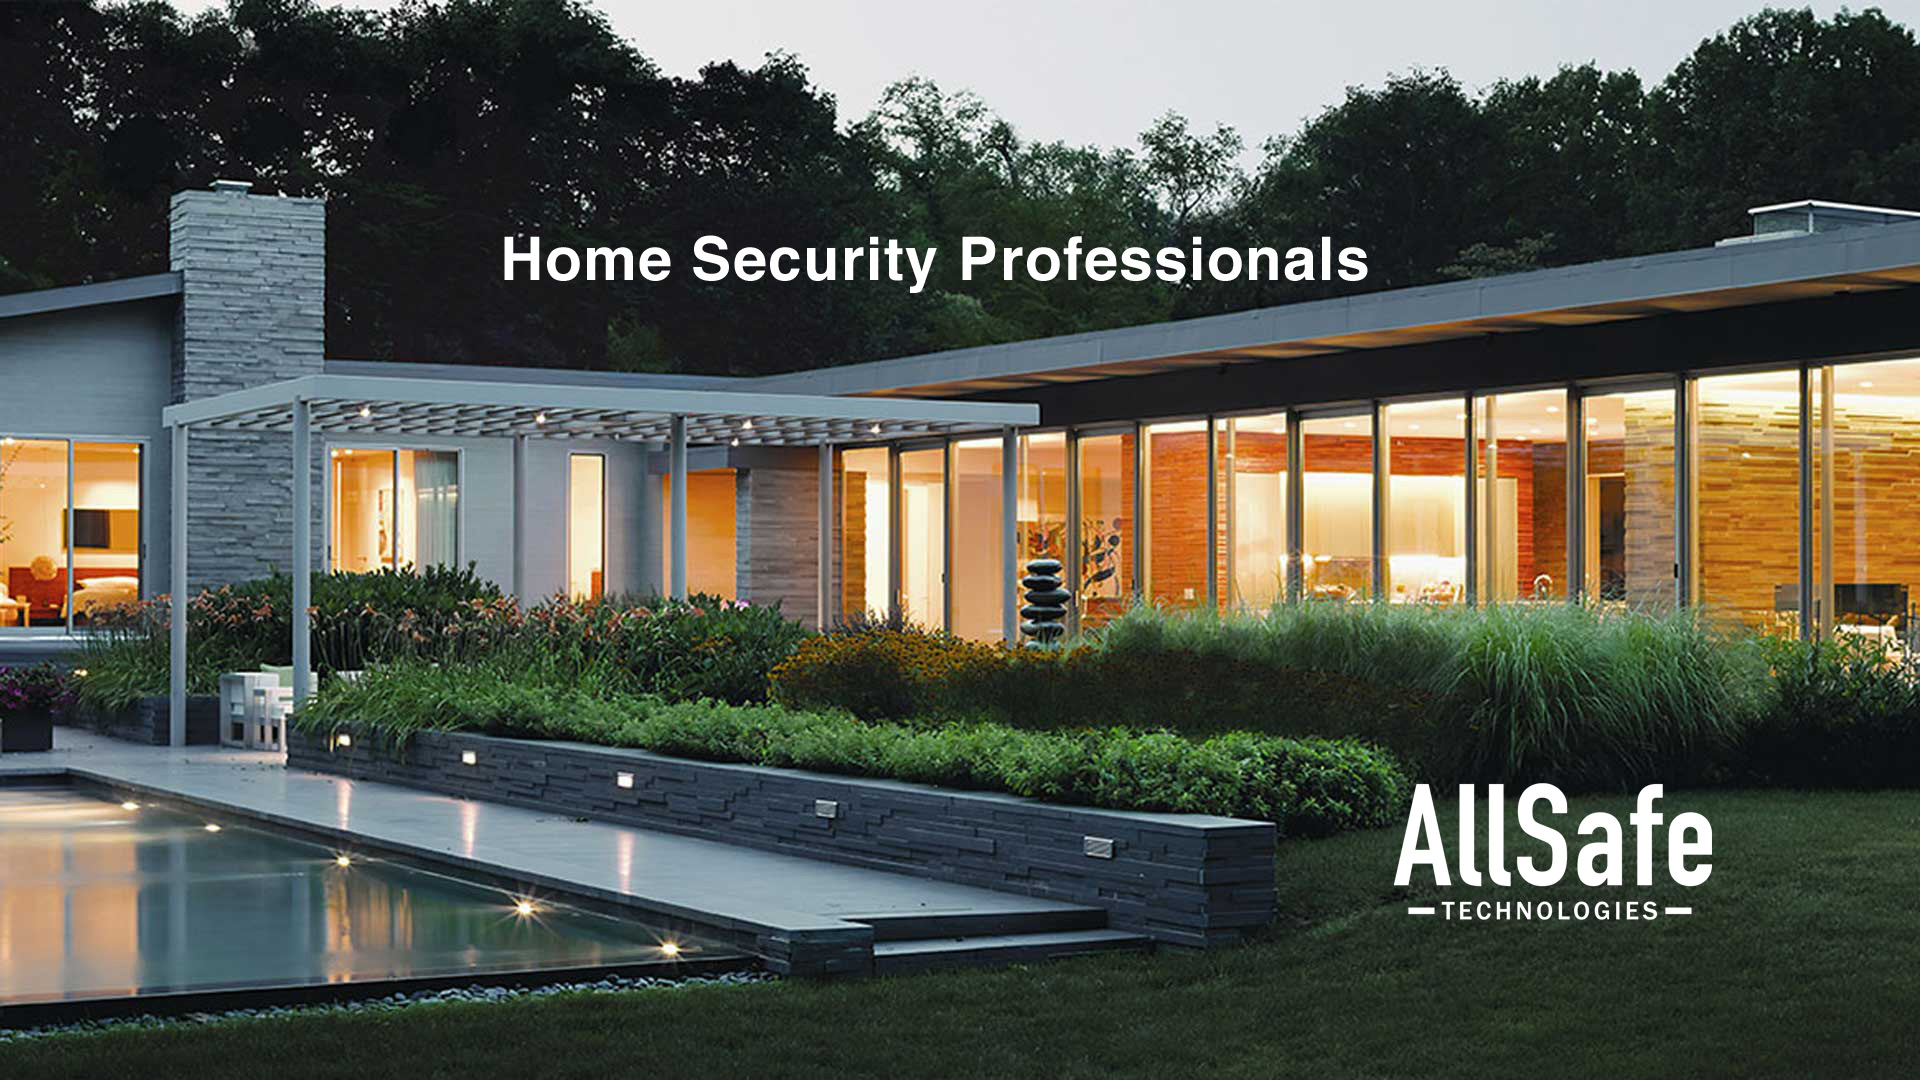 Home Security Professionals